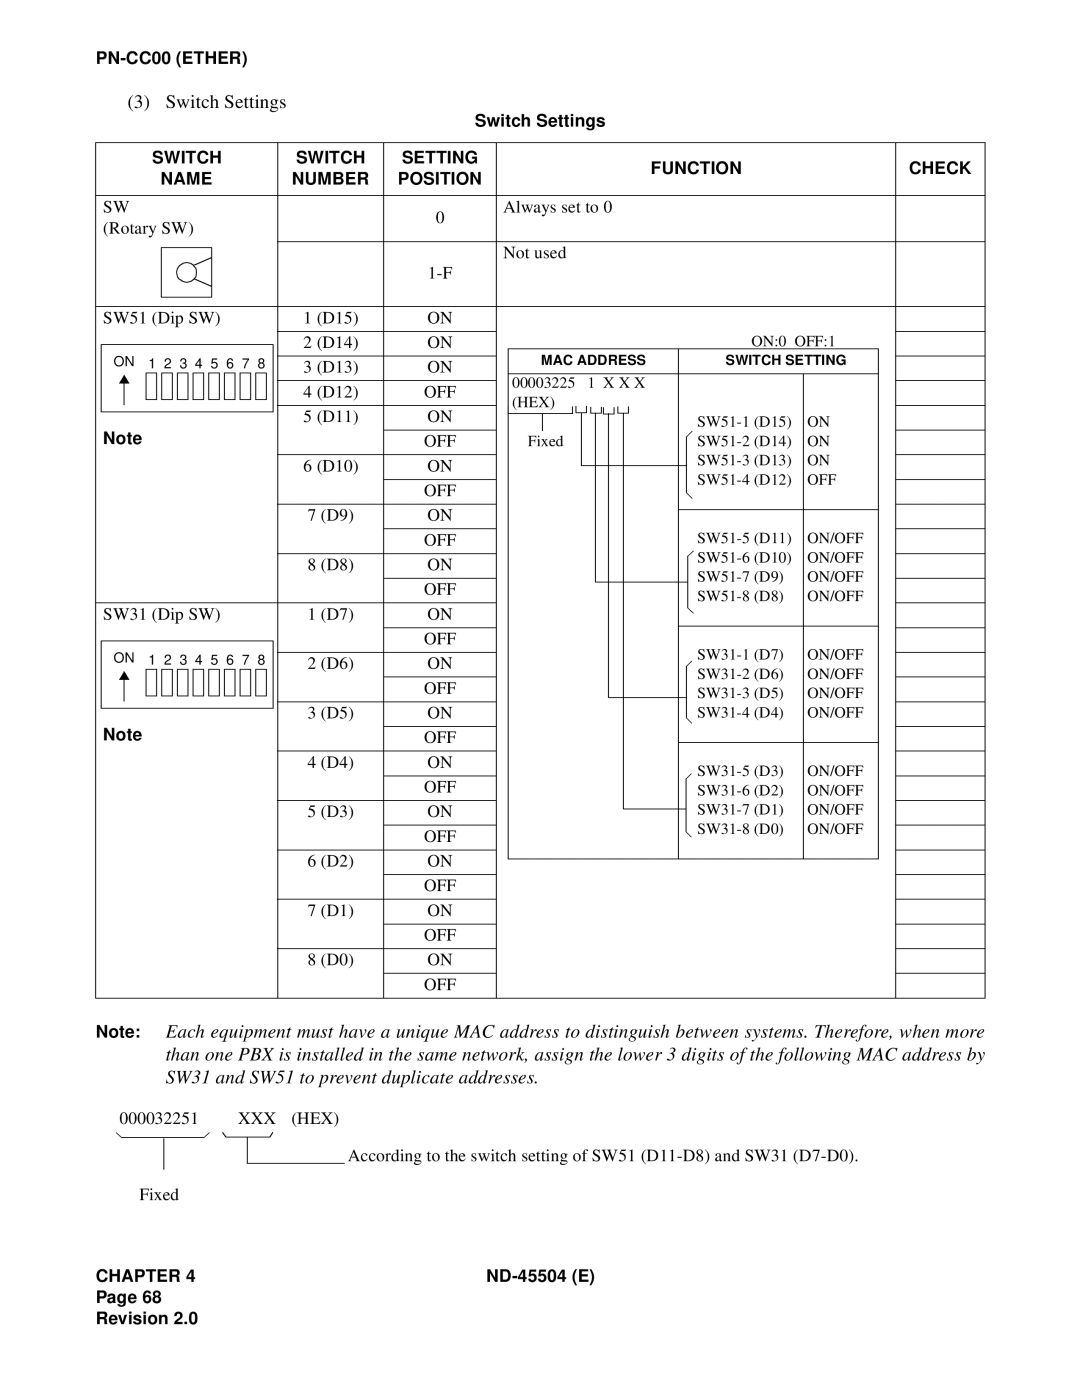 NEC 2000 IVS manual Switch Settings, Always set to 